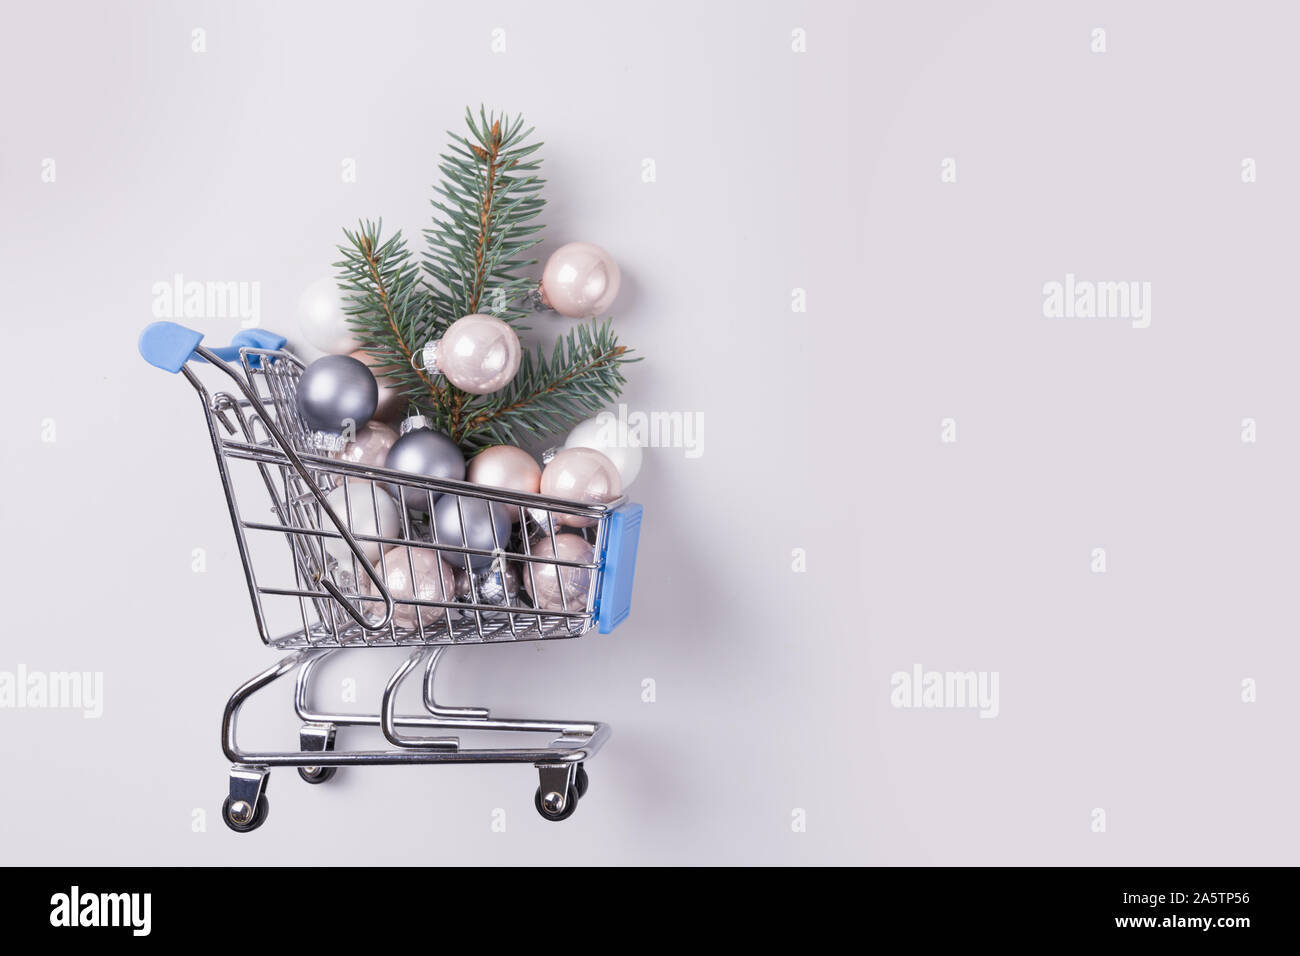 Christmas sale, shopping concept - trolley cart full of balls and xmas tree. Preparation to holiday and boxing day. Top view. Space for text. Stock Photo